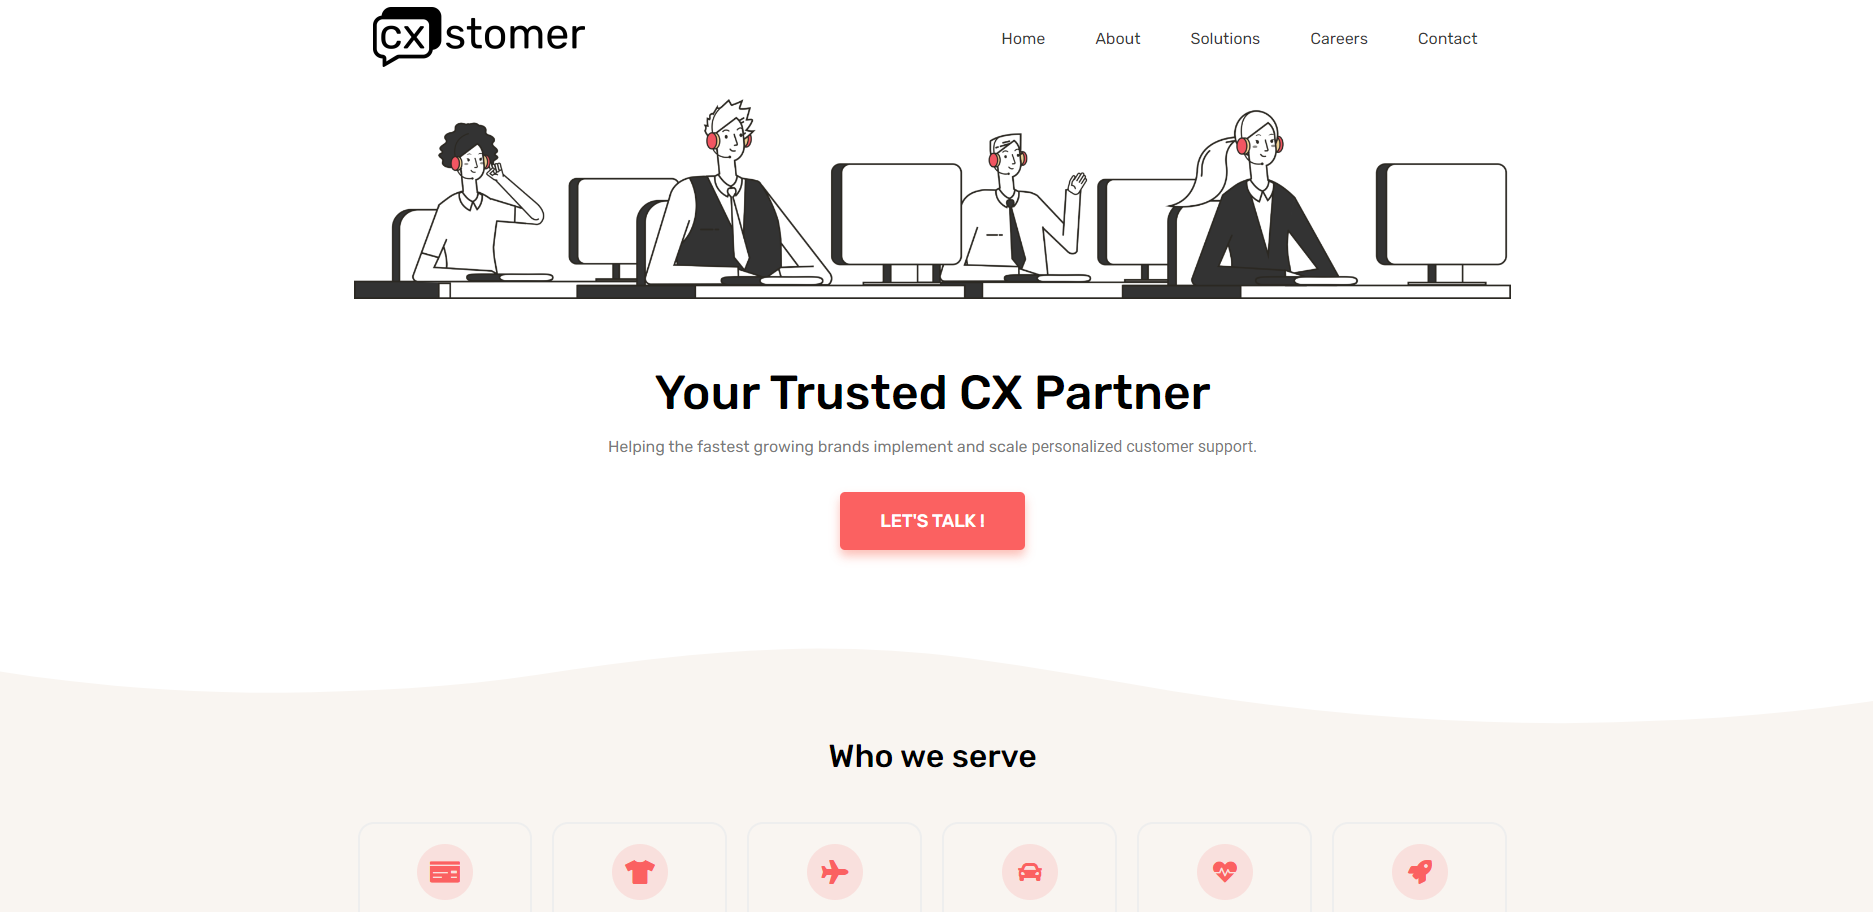 Cxstomer brand and website